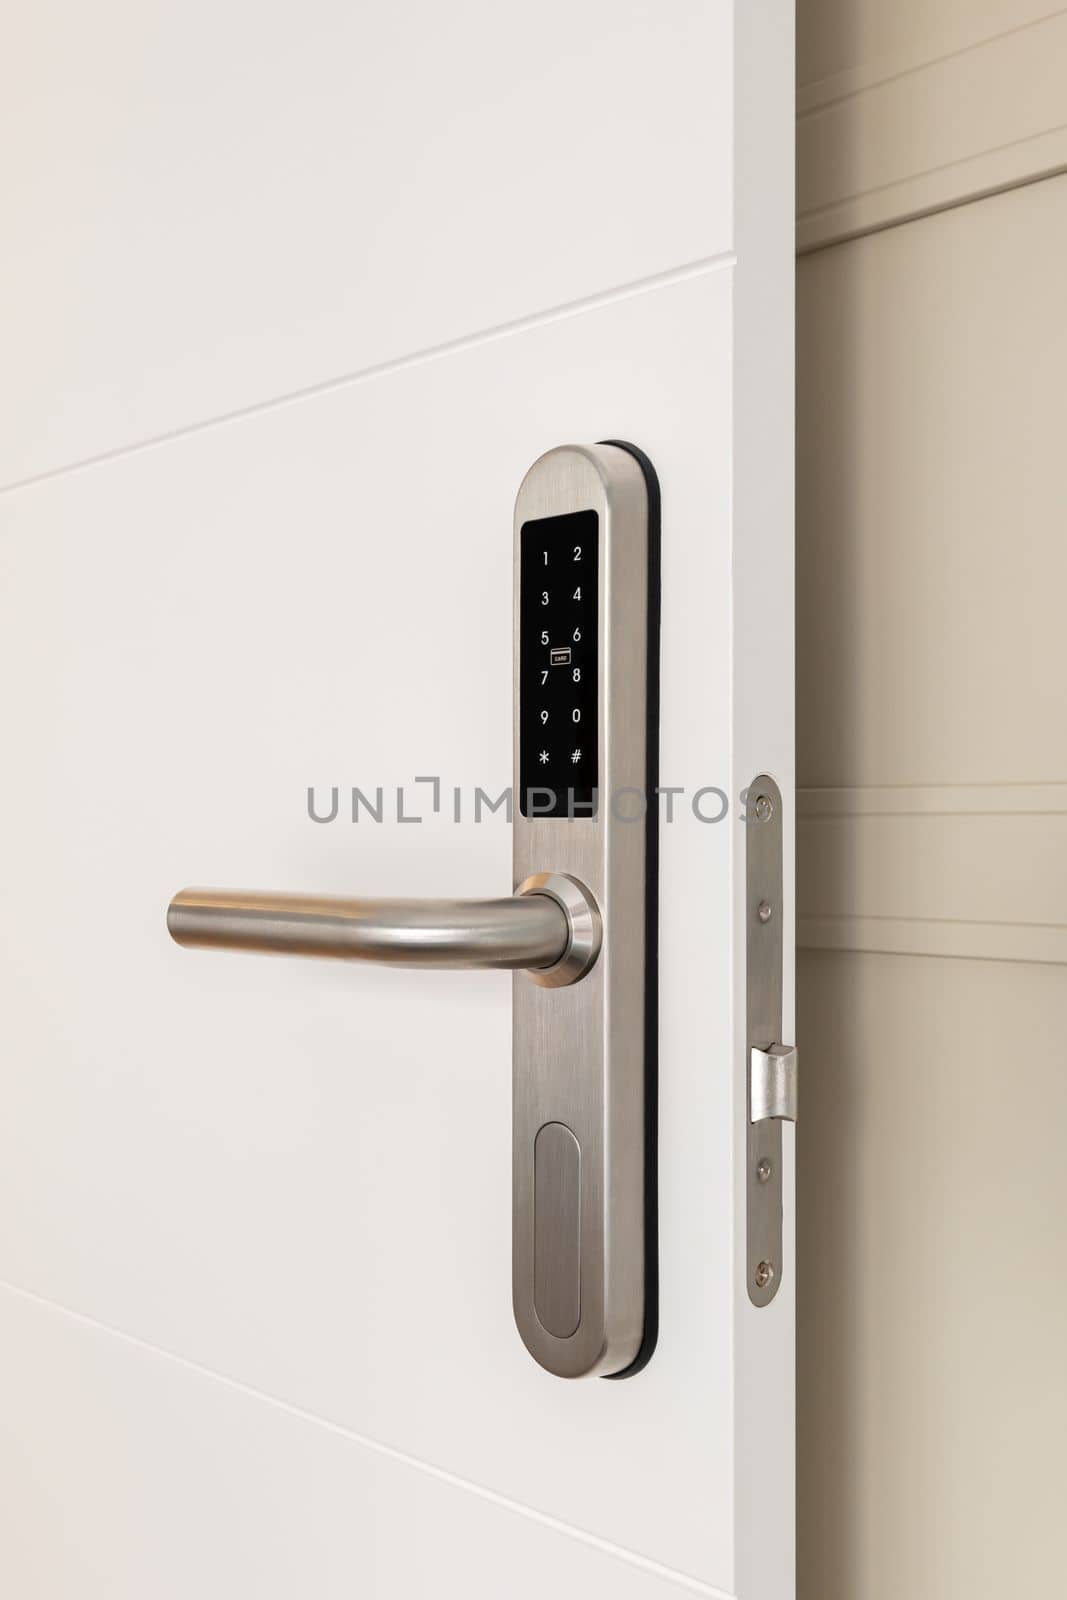 Entrance white wooden door with an electronic lock for the security of the apartment. On the lock there are buttons with numbers for entering the code. Chrome metal lock. by apavlin